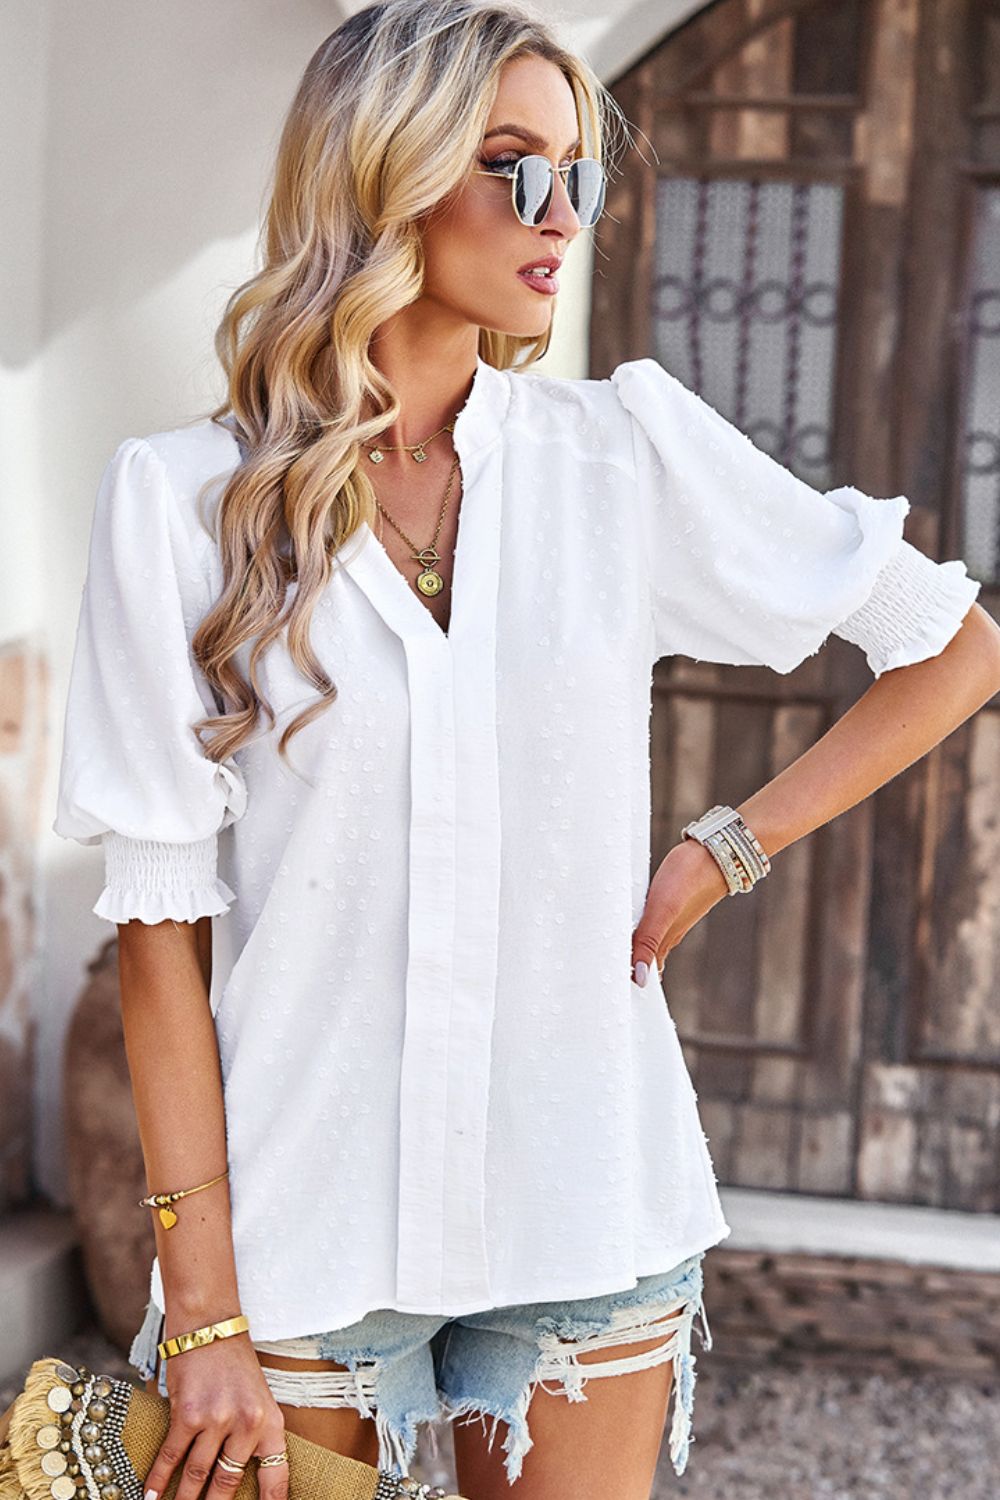 Textured Notched Neck Puff Sleeve Blouse - The Downtown Dachshund